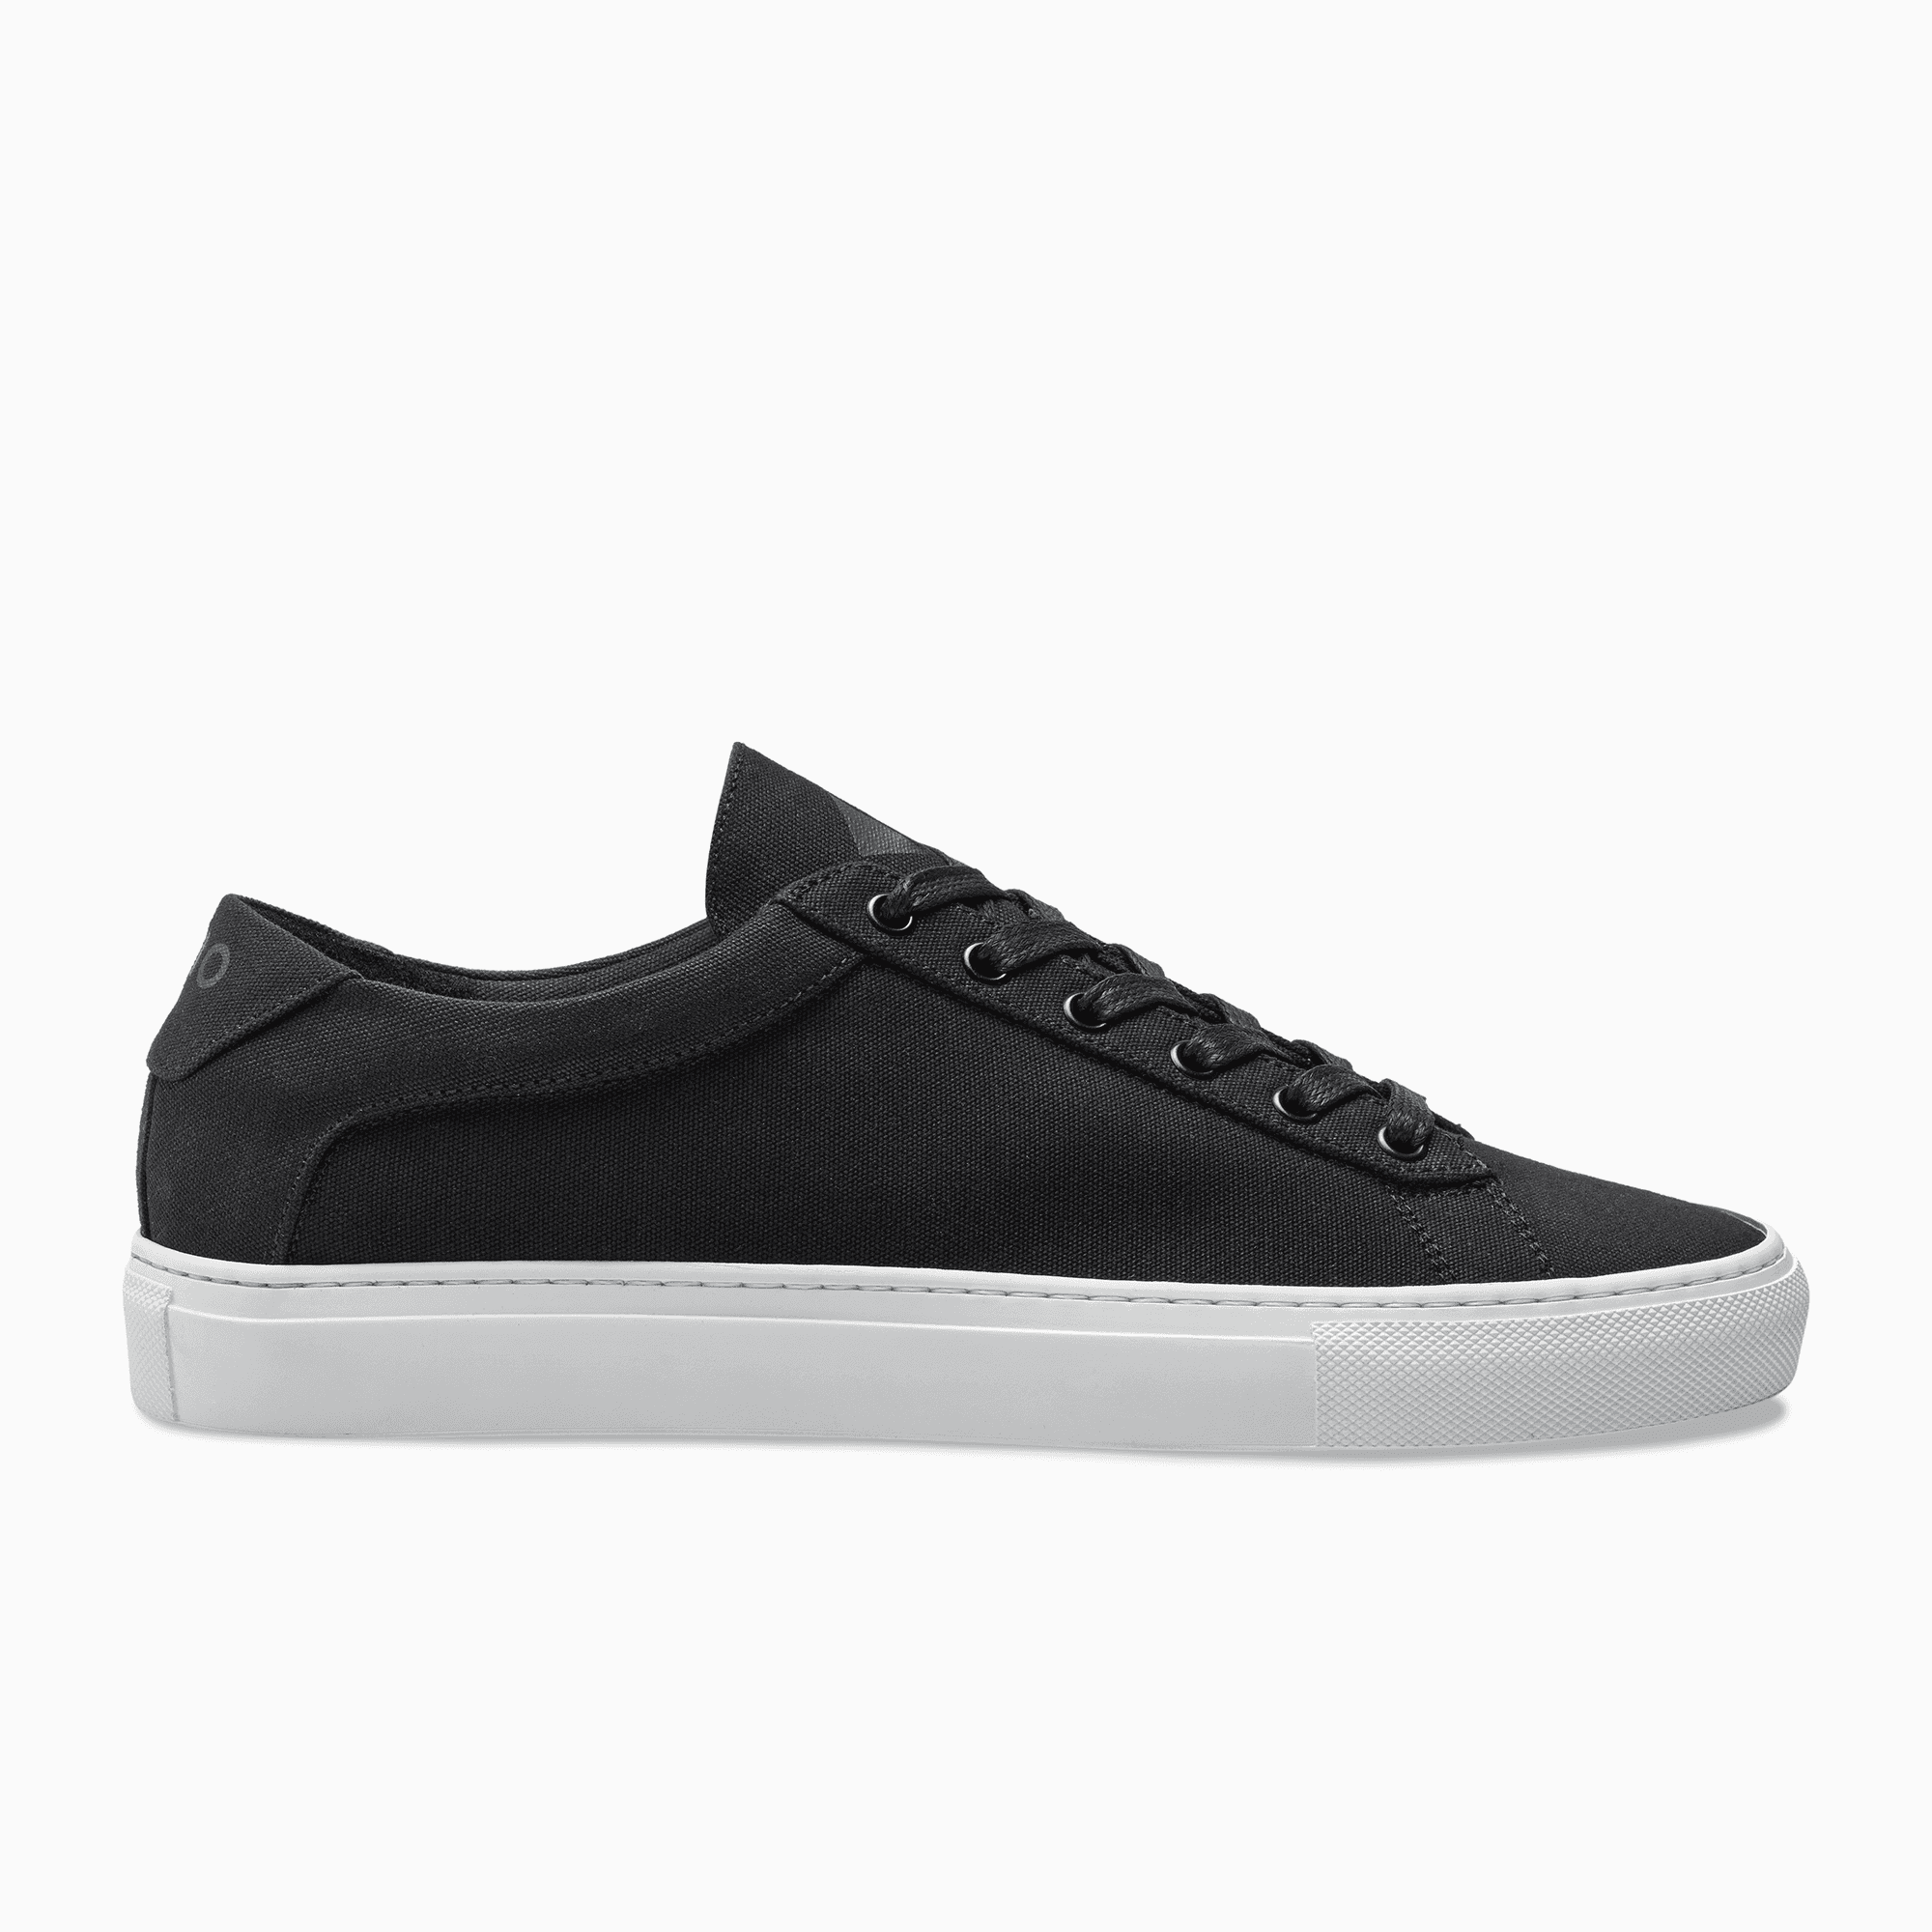 Black Canvas Low Top Sneaker white sole  Womens Koio